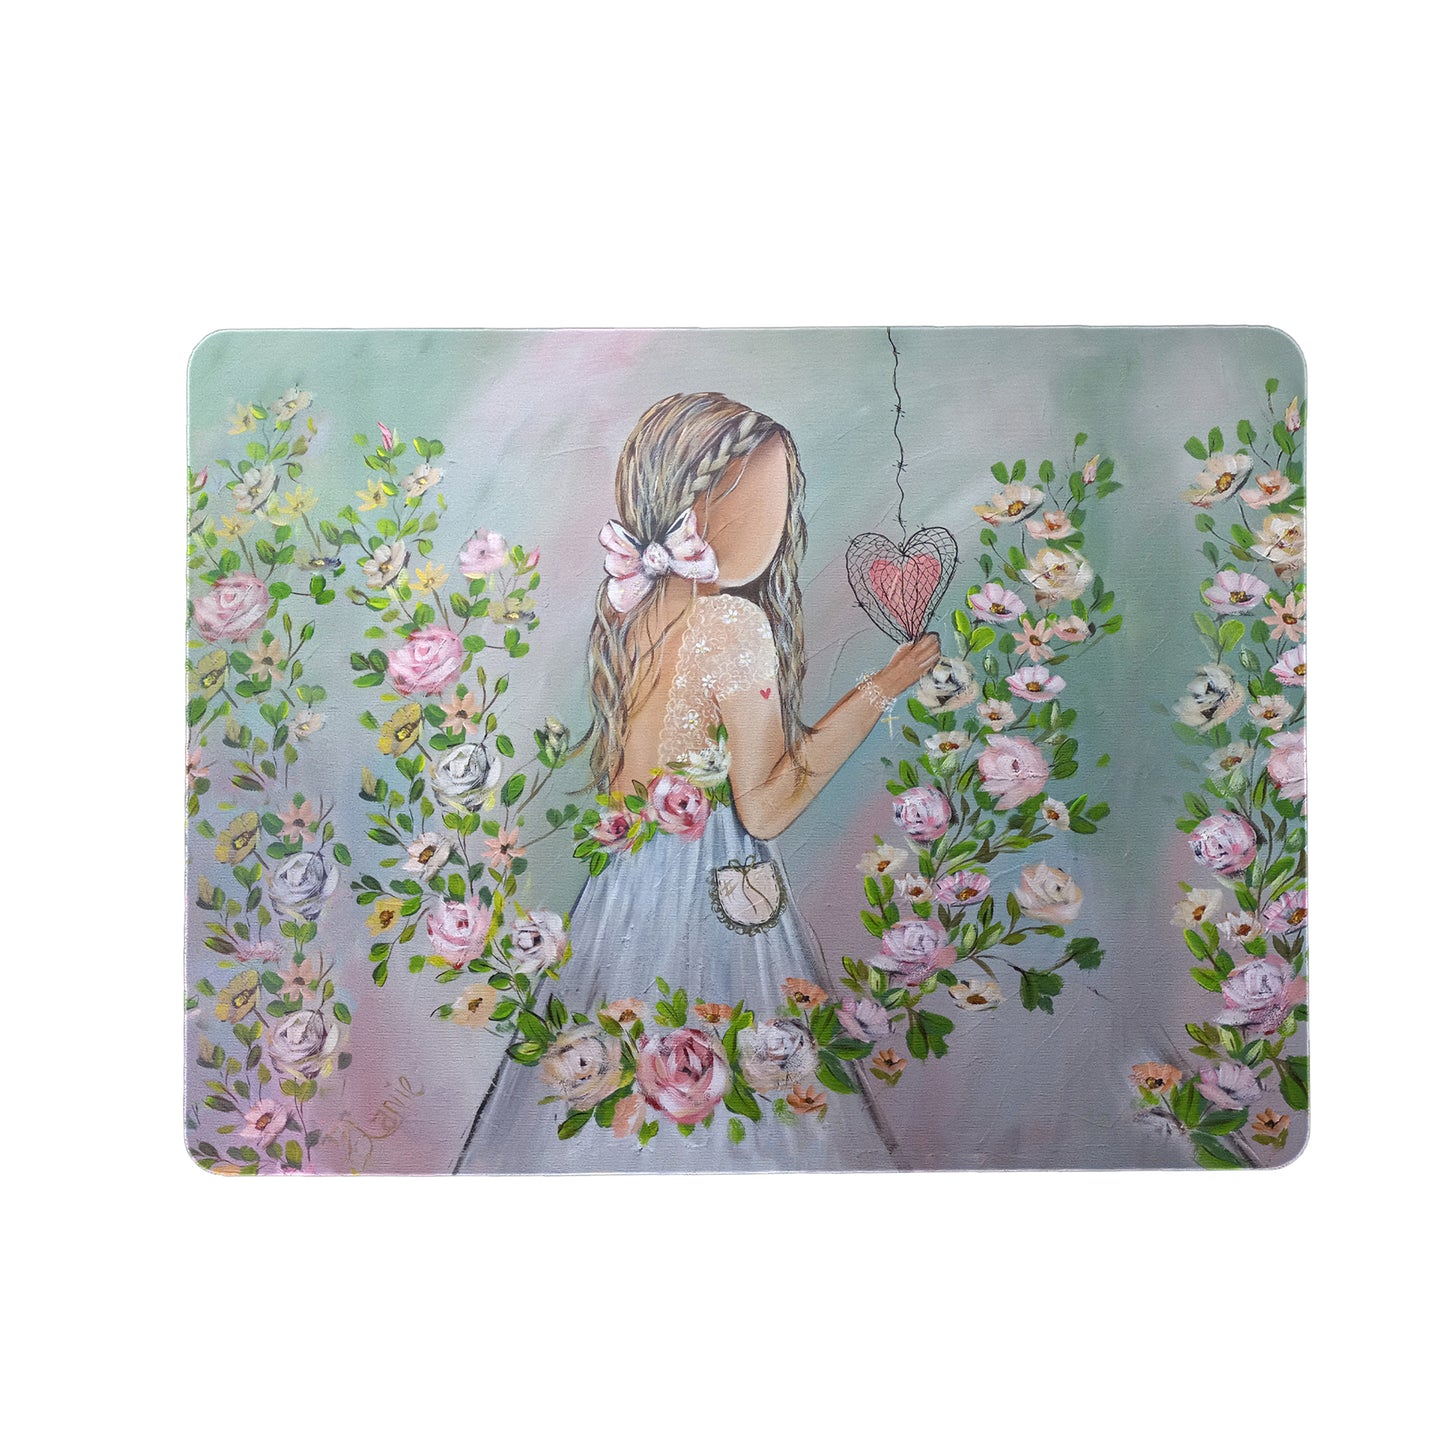 Flower Banner Girl Placemats by Lanie Wolvaardt